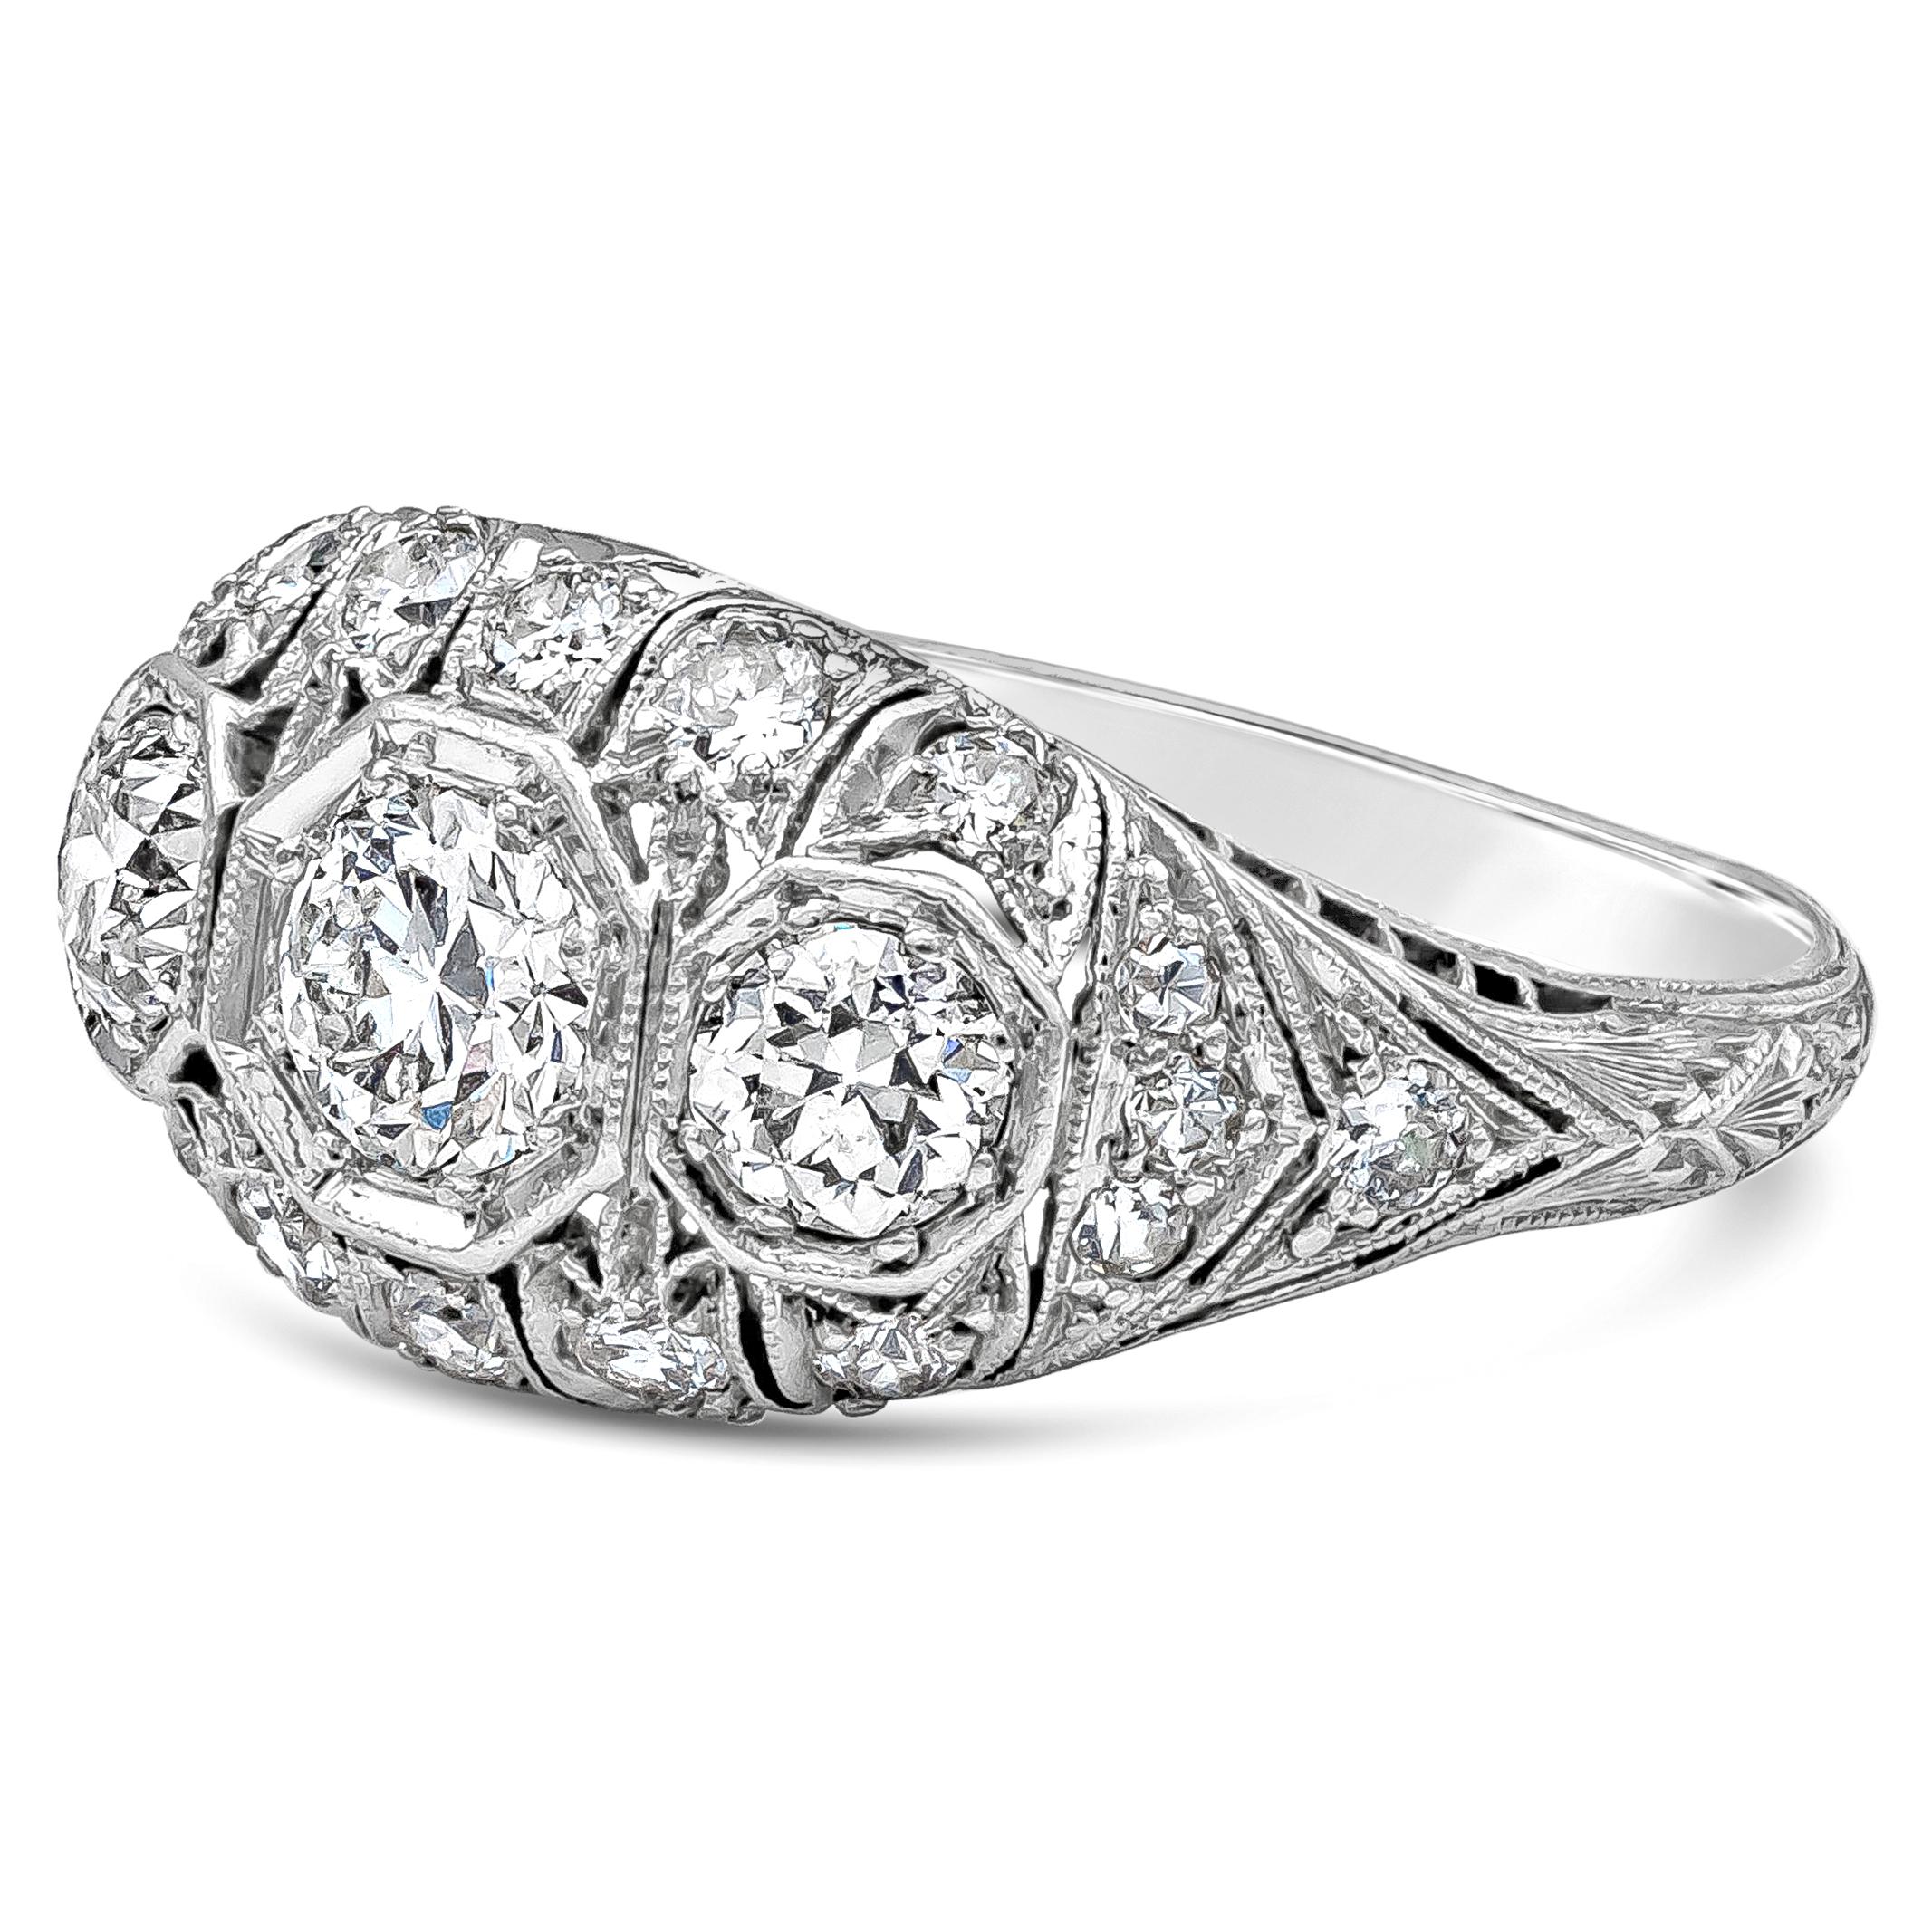 An antique engagement ring style showcasing mixed-shape diamonds weighing 1.45 carats total. Near-colorless and VS-VS1 in Clarity. Made with Platinum. Size 8.5 US

Style available in different price ranges. Prices are based on diamond size, and